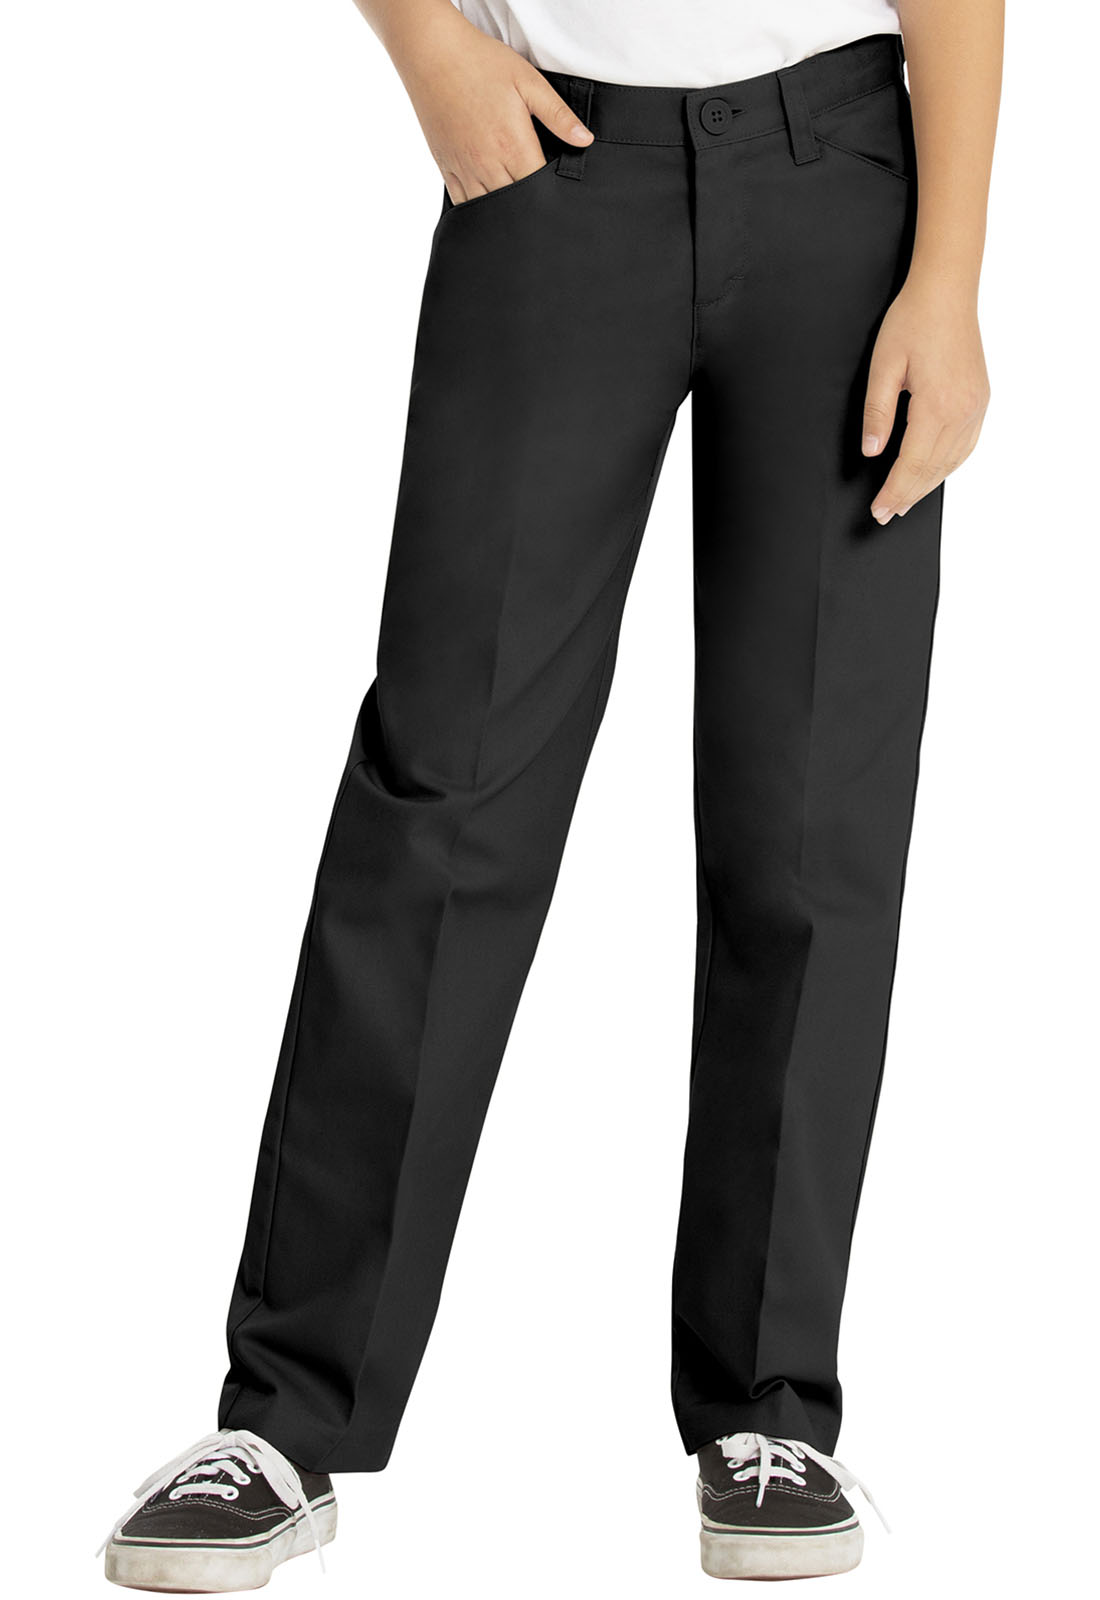 Real School Uniforms Real School Girls-Jrs Bottoms Girls Low Rise Pant